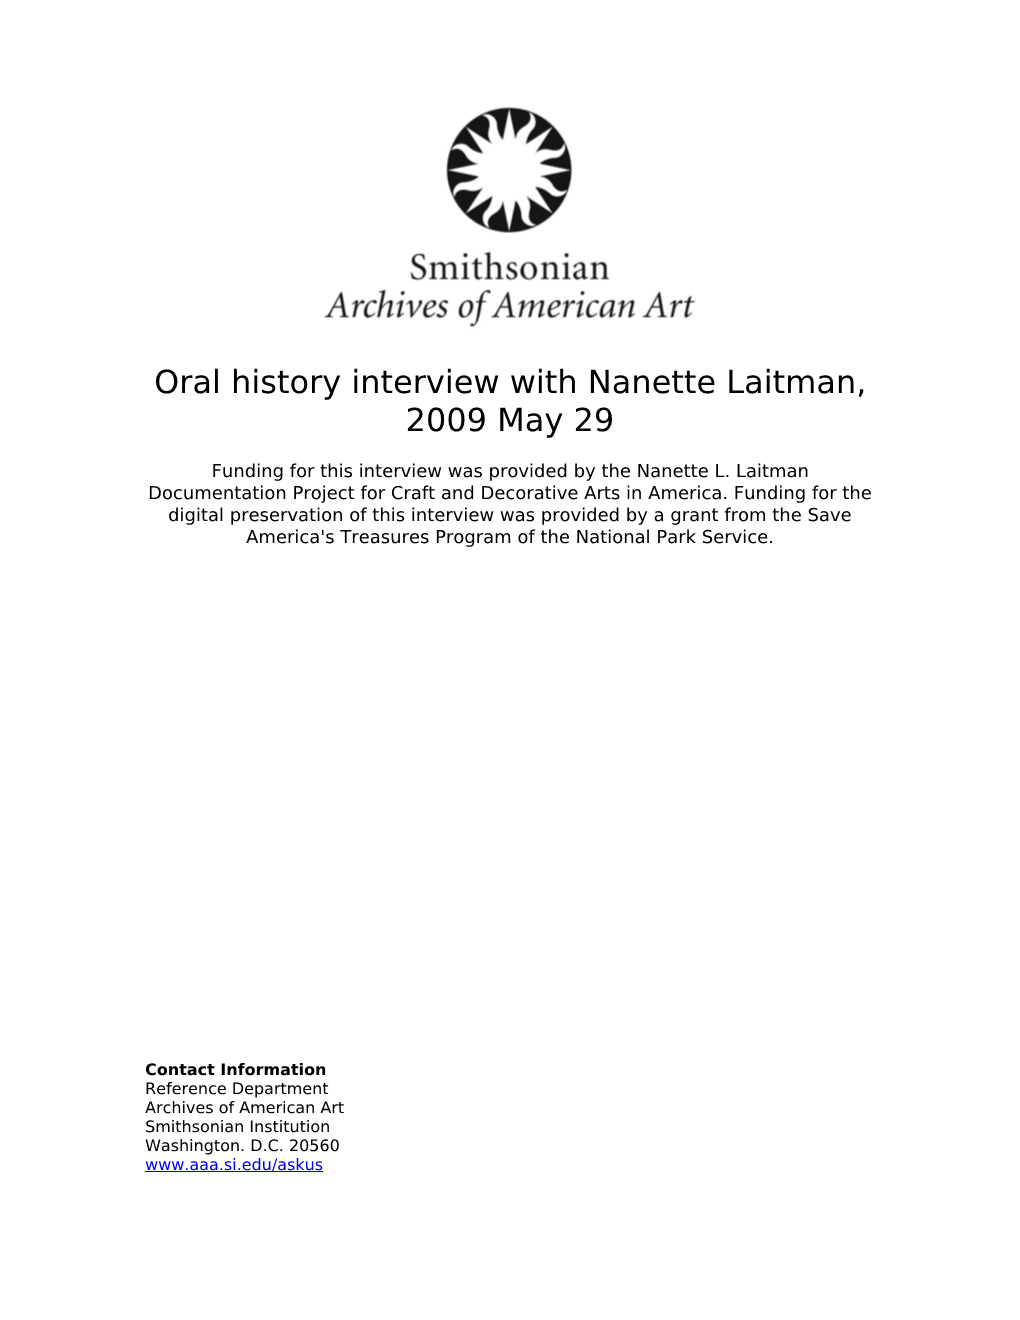 Oral History Interview with Nanette Laitman, 2009 May 29